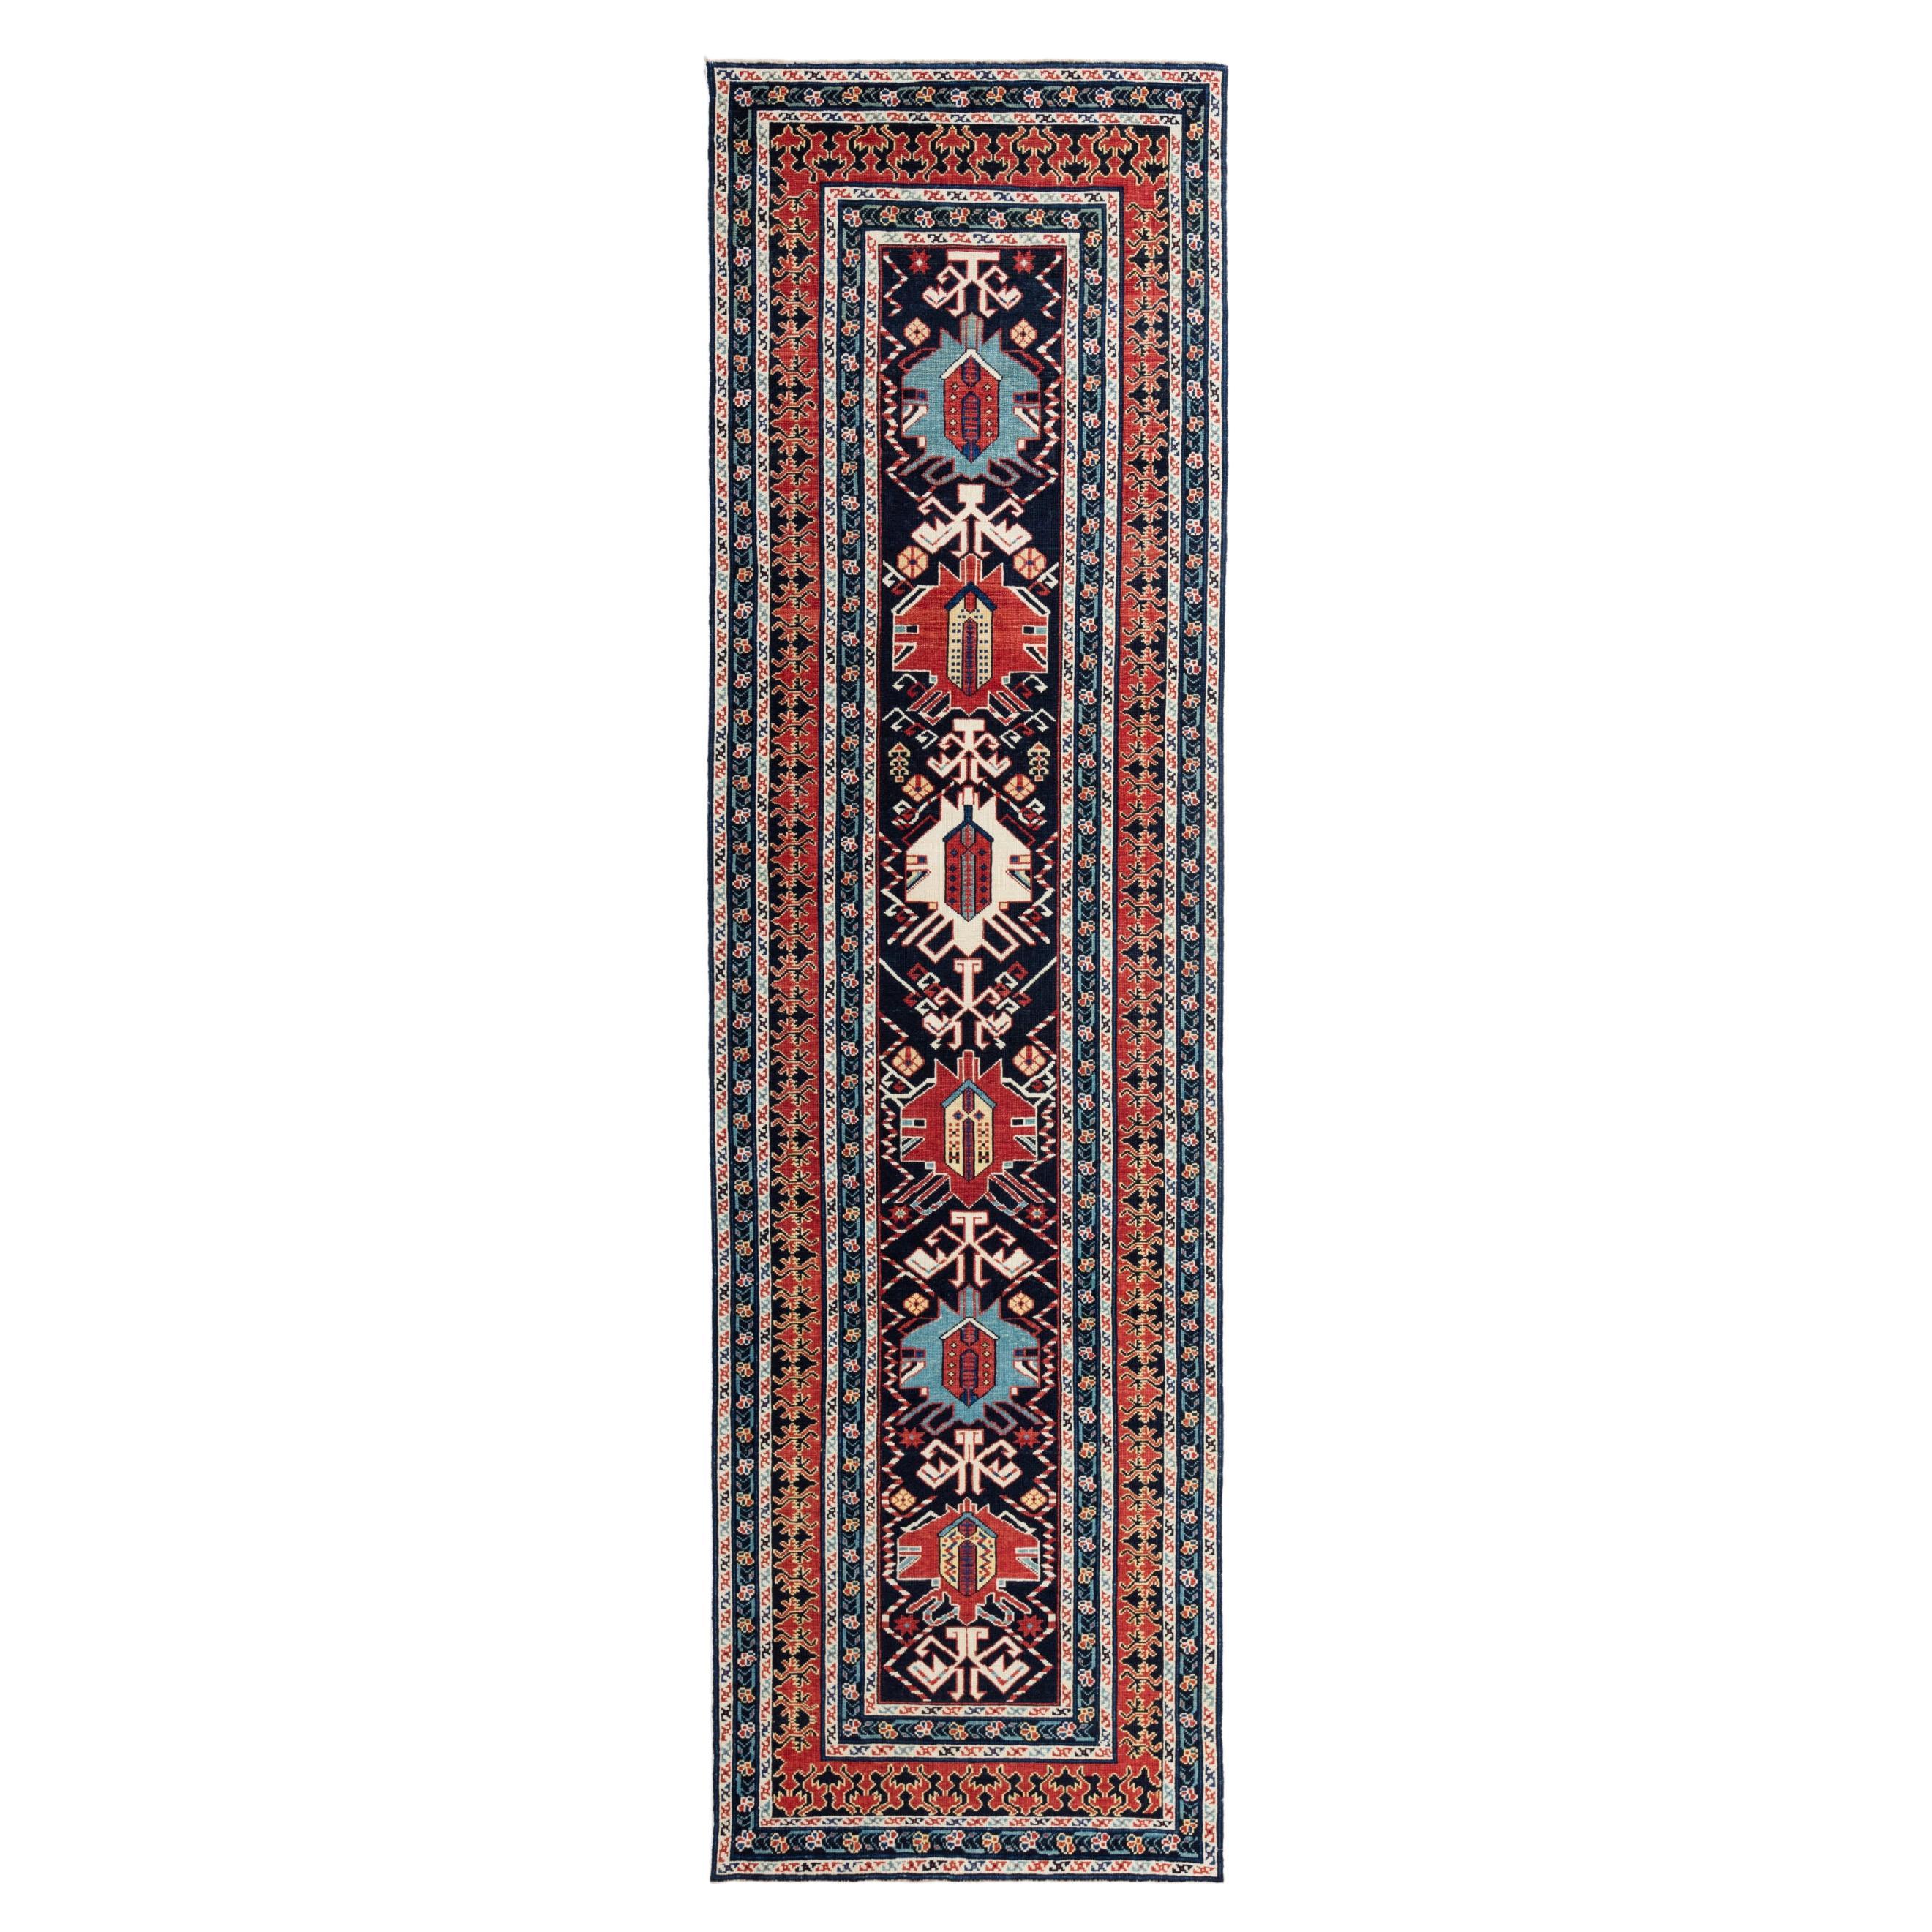 Ararat Rugs Kuba Rug with Palmettes Caucasian Revival Carpet - Natural Dyed For Sale